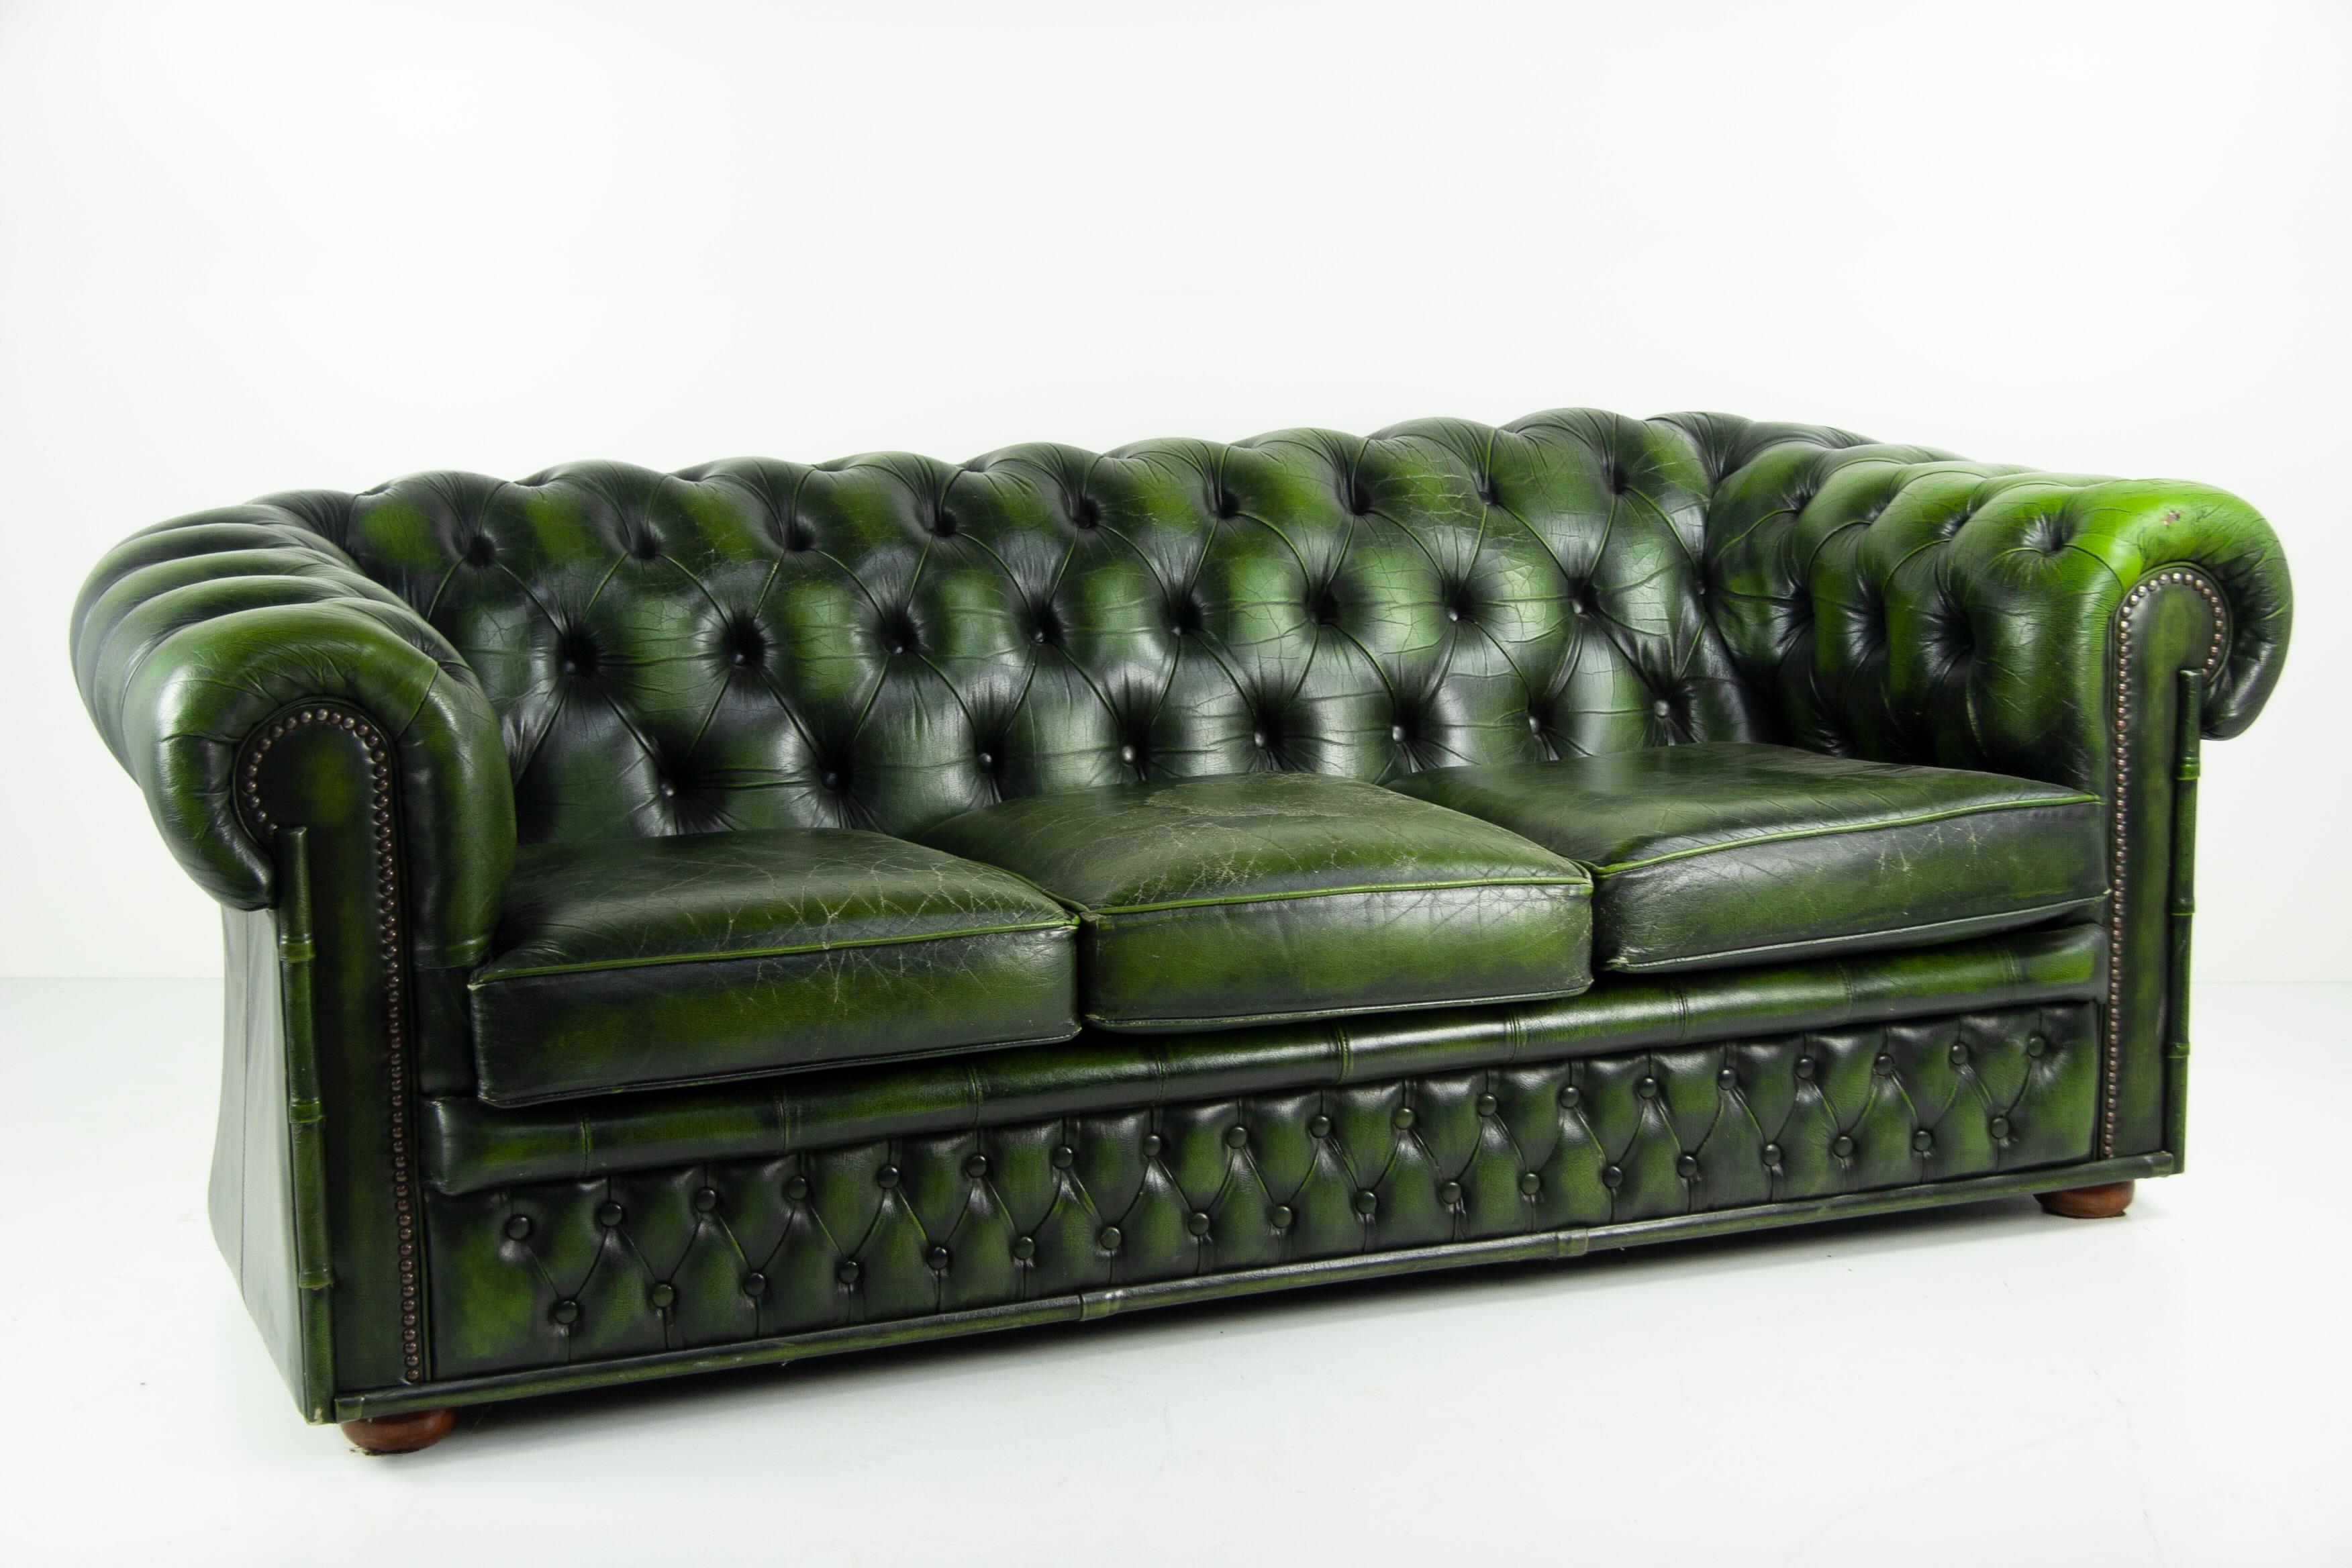 Immerse yourself in the allure of classic British elegance with this Vintage 60s London Chesterfield Sofa. Resplendent in its petrol green leather, this piece is a standout artifact of its era. The rich patina of the leather adds depth and